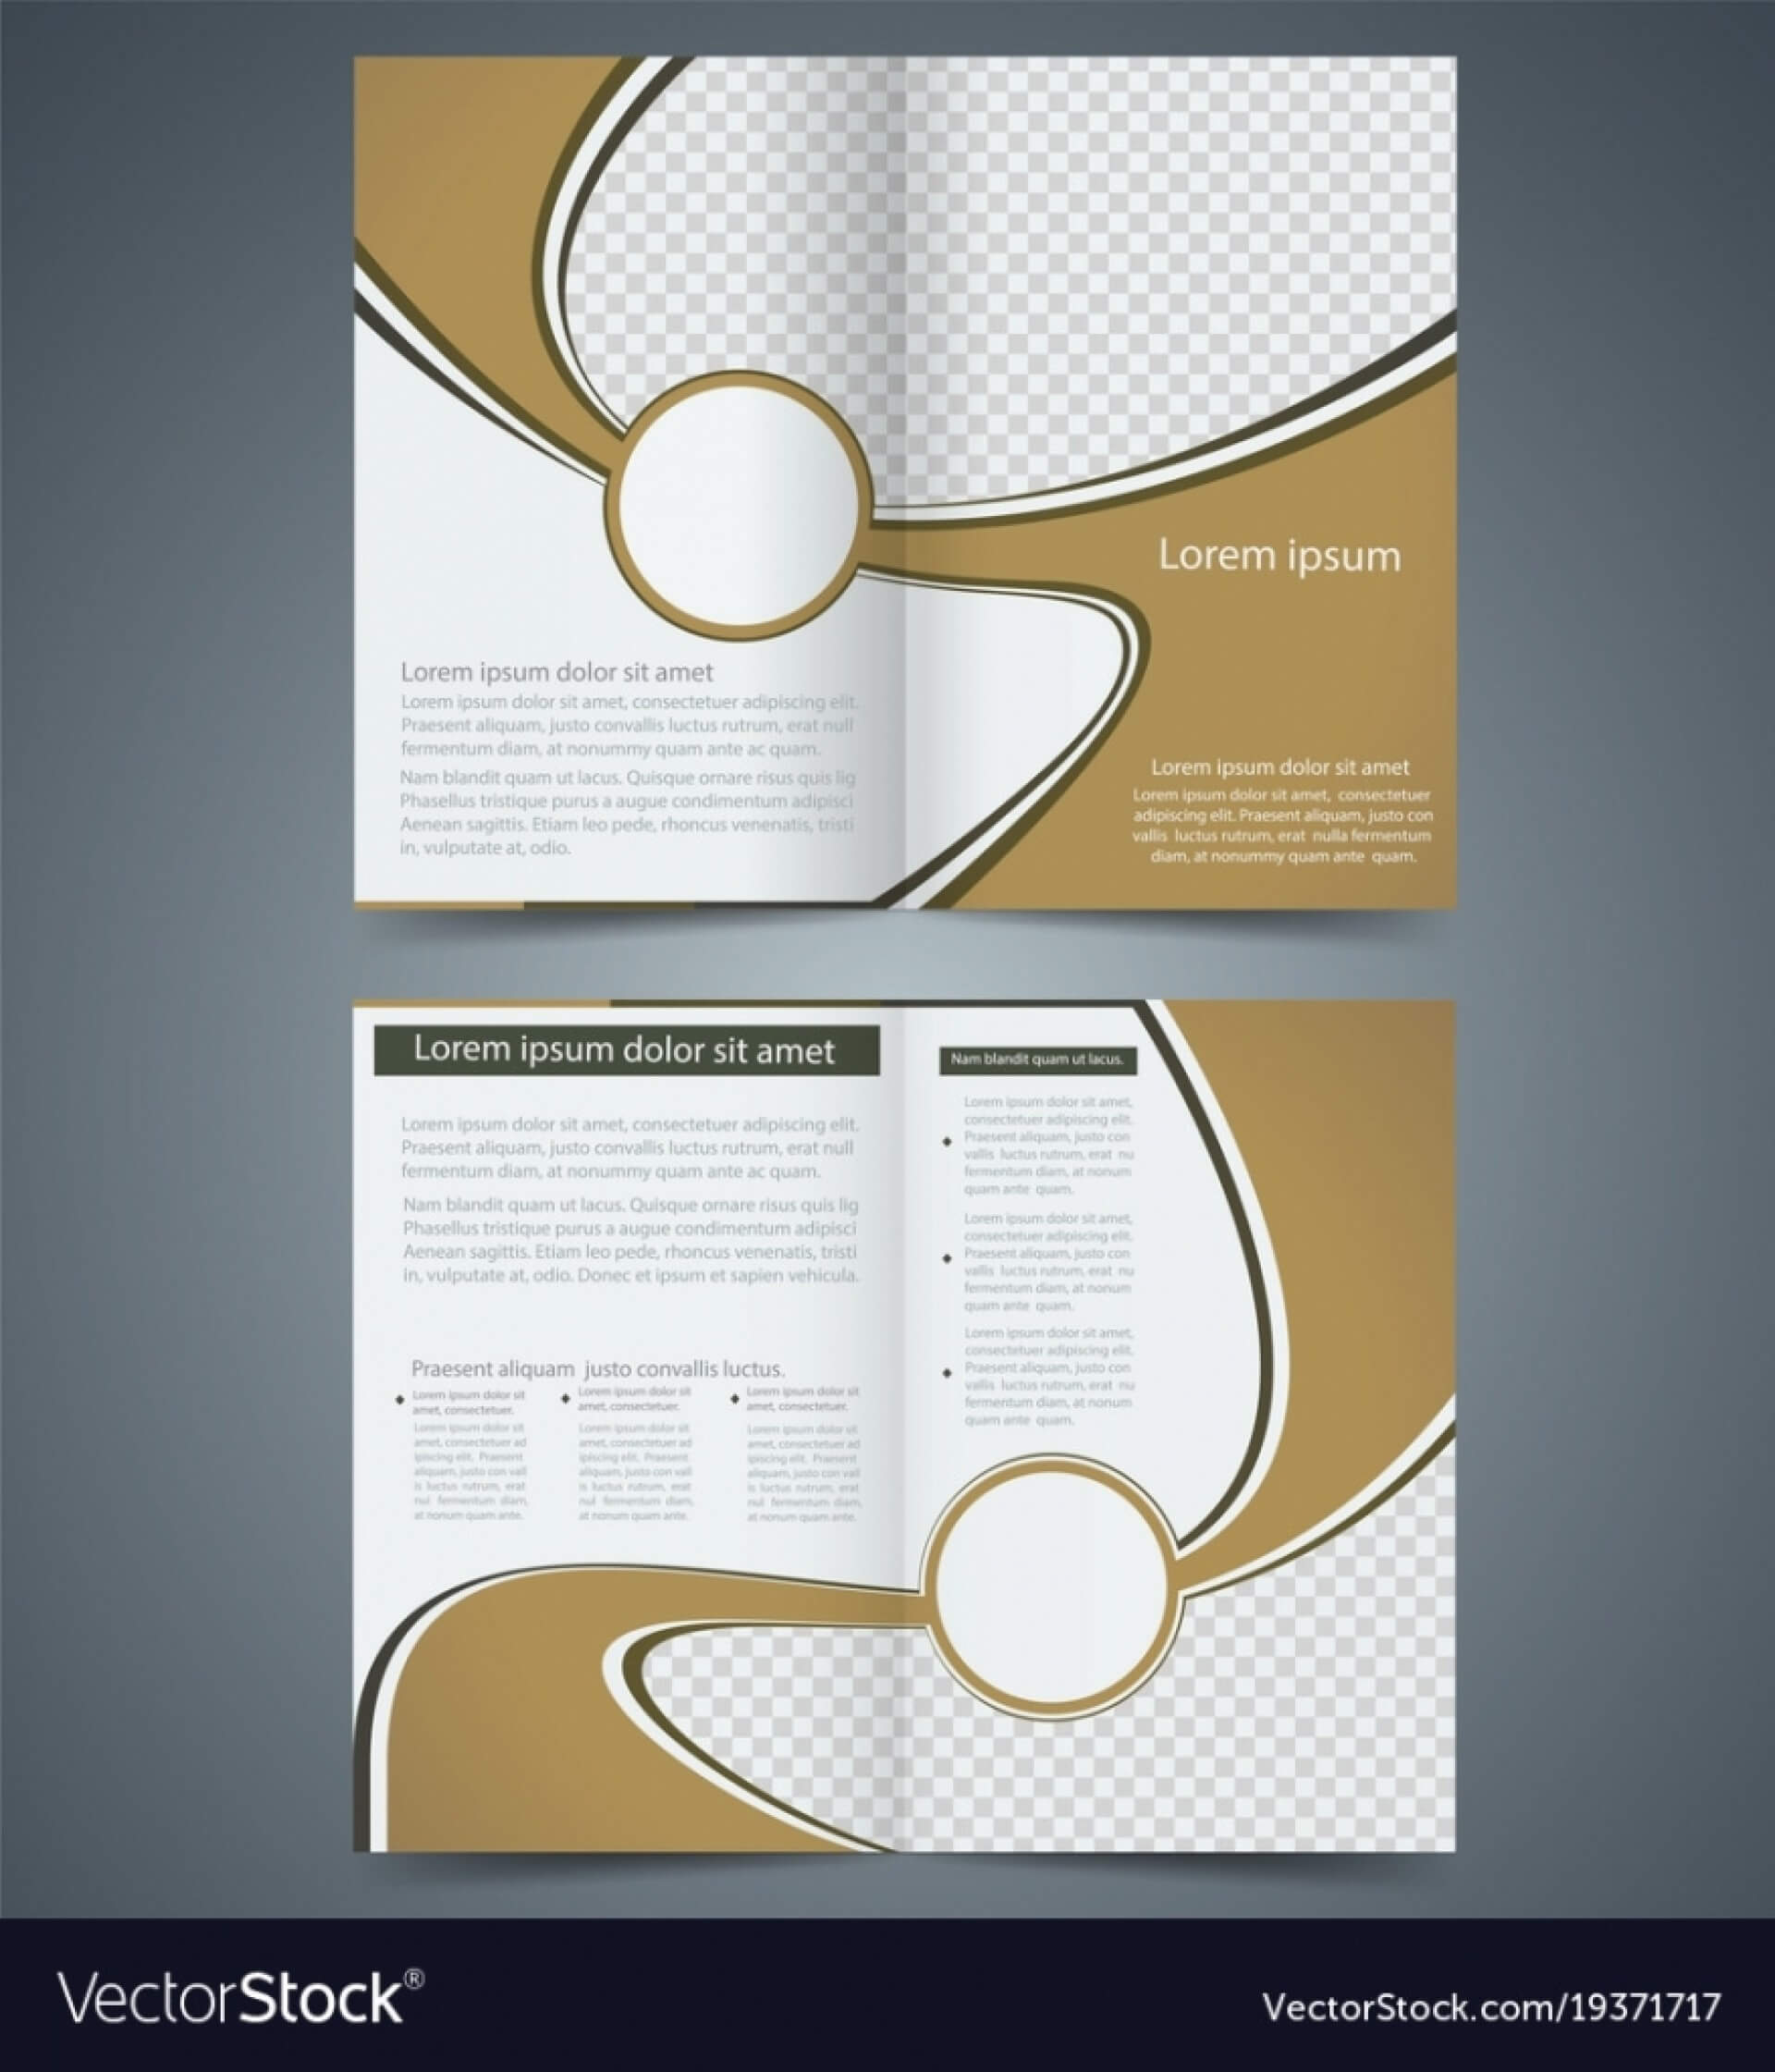 006 Ms Word Free Templates Brochure Template Stunning Ideas Within Free Template For Brochure Microsoft Office